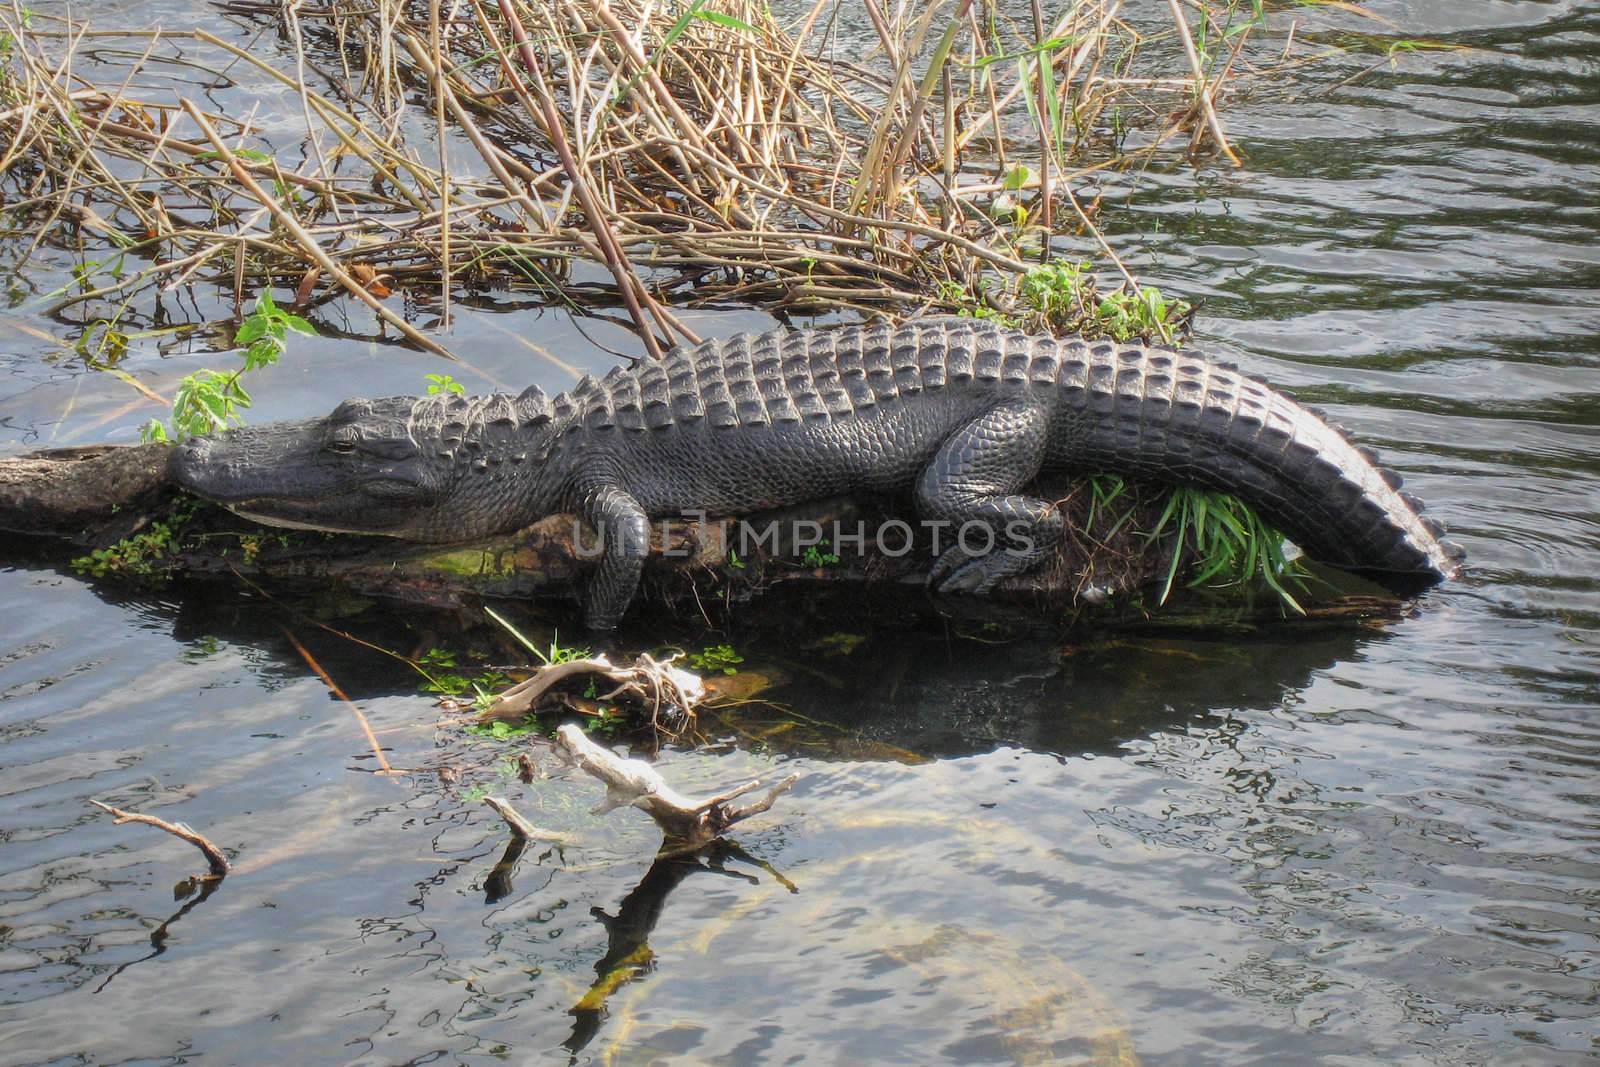 Relaxed Crocodile, Everglades, Florida, January 2007 by jovannig